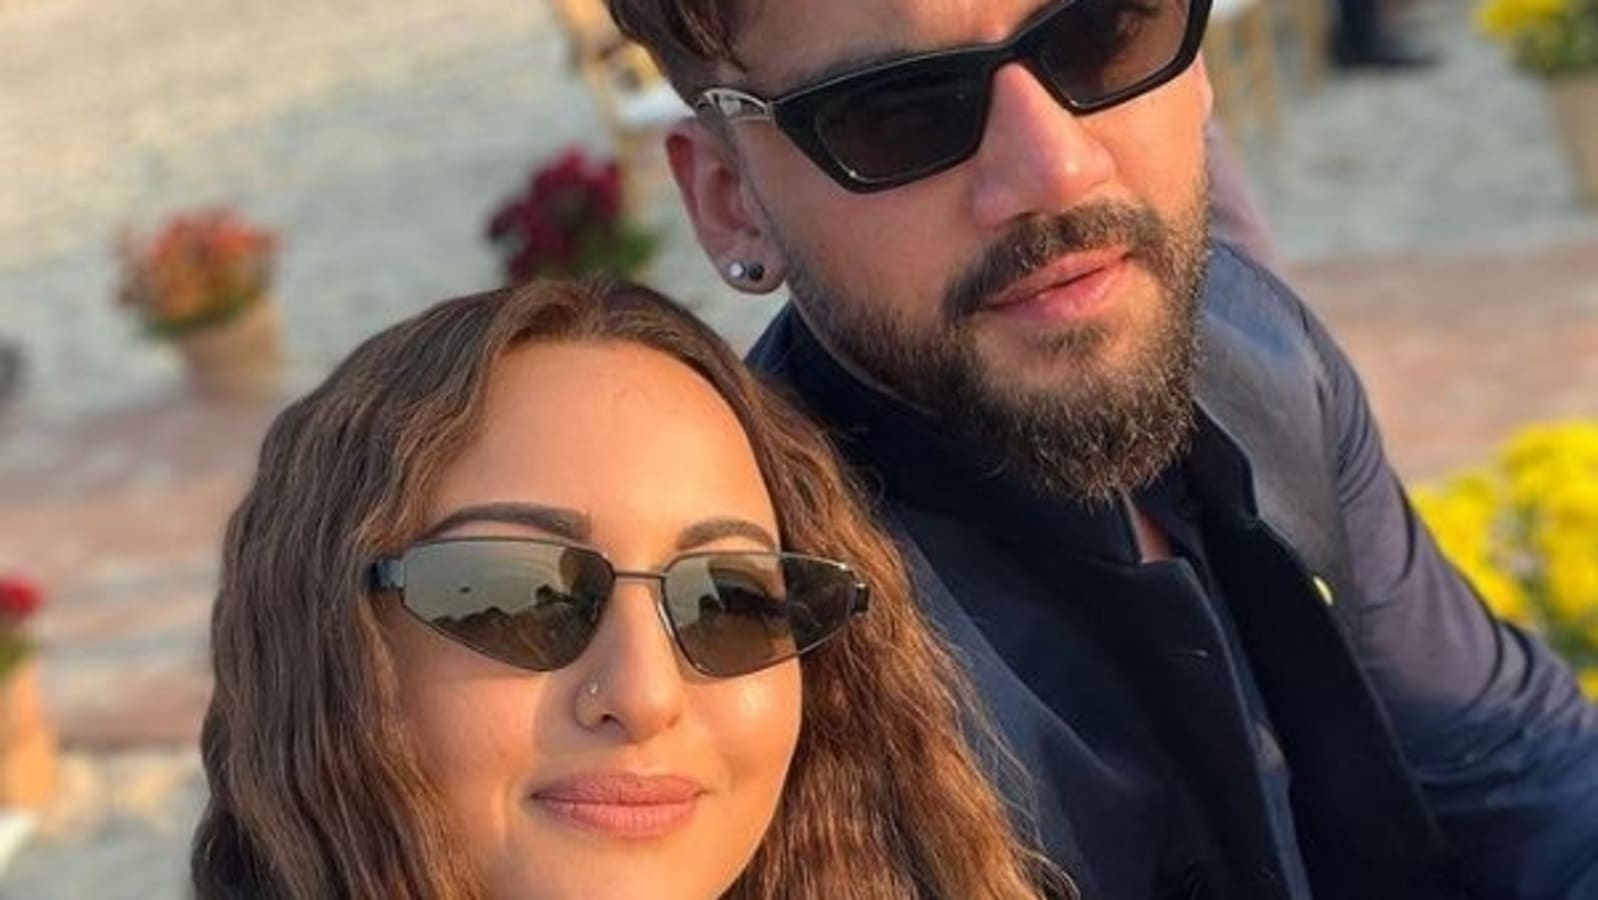 Sonakshi Bf Xxx - Sonakshi Sinha and Zaheer Iqbal say 'I Love You' to each other. Watch video  | Bollywood - Hindustan Times